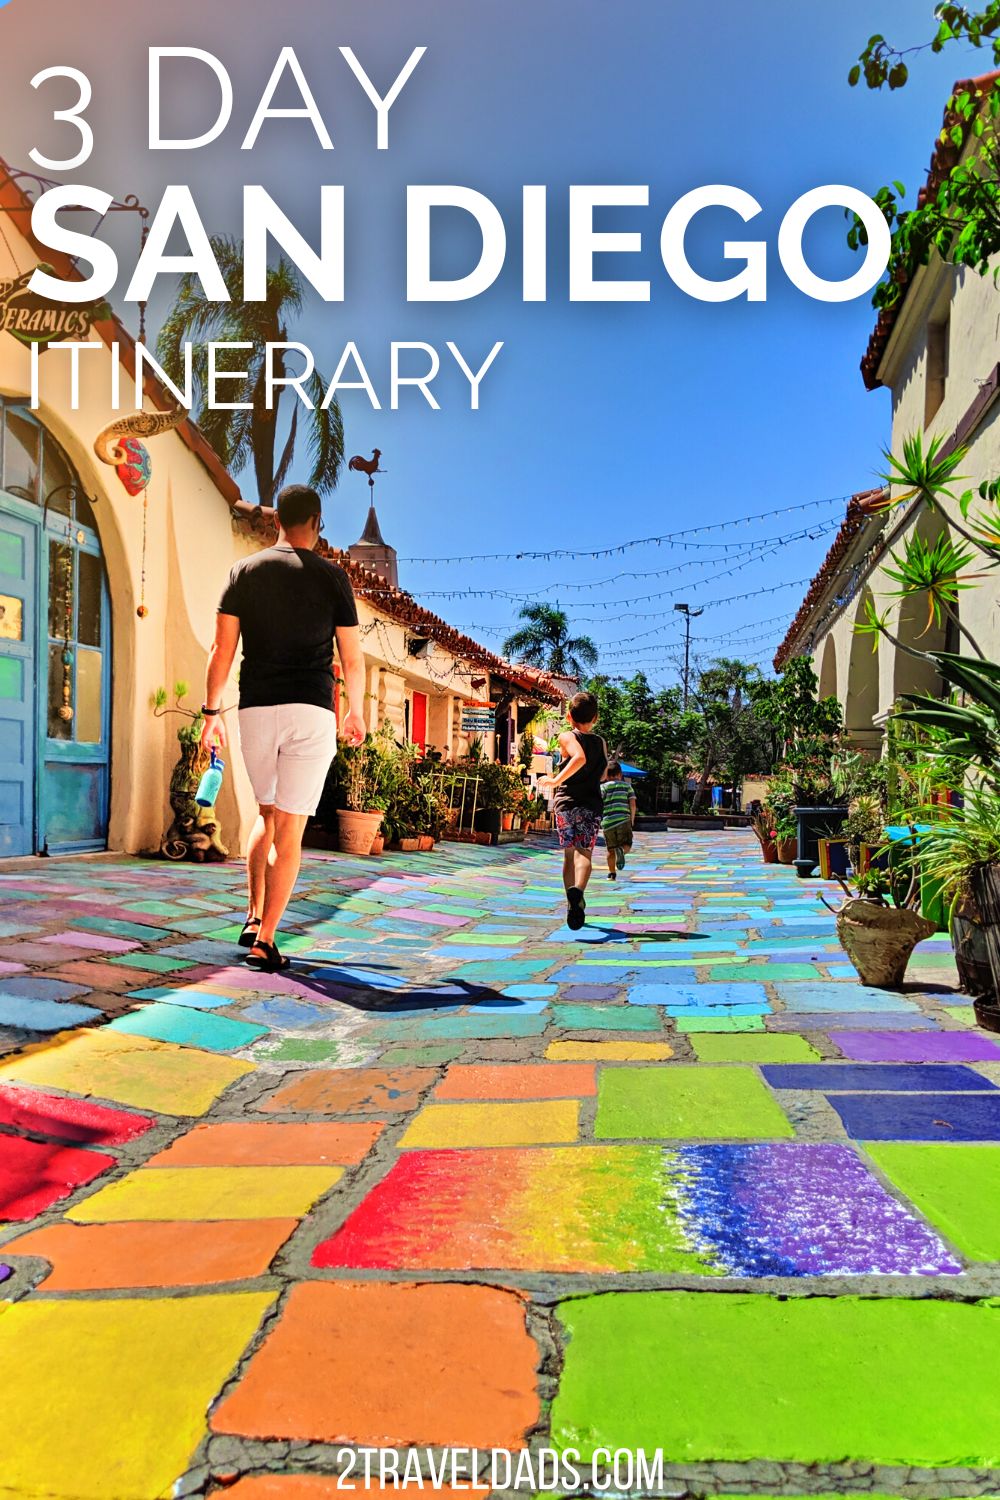 This three-day San Diego itinerary is awesome for enjoying the beaches, history, culture and nature of SD. Ideas for planning a long weekend trip to San Diego.